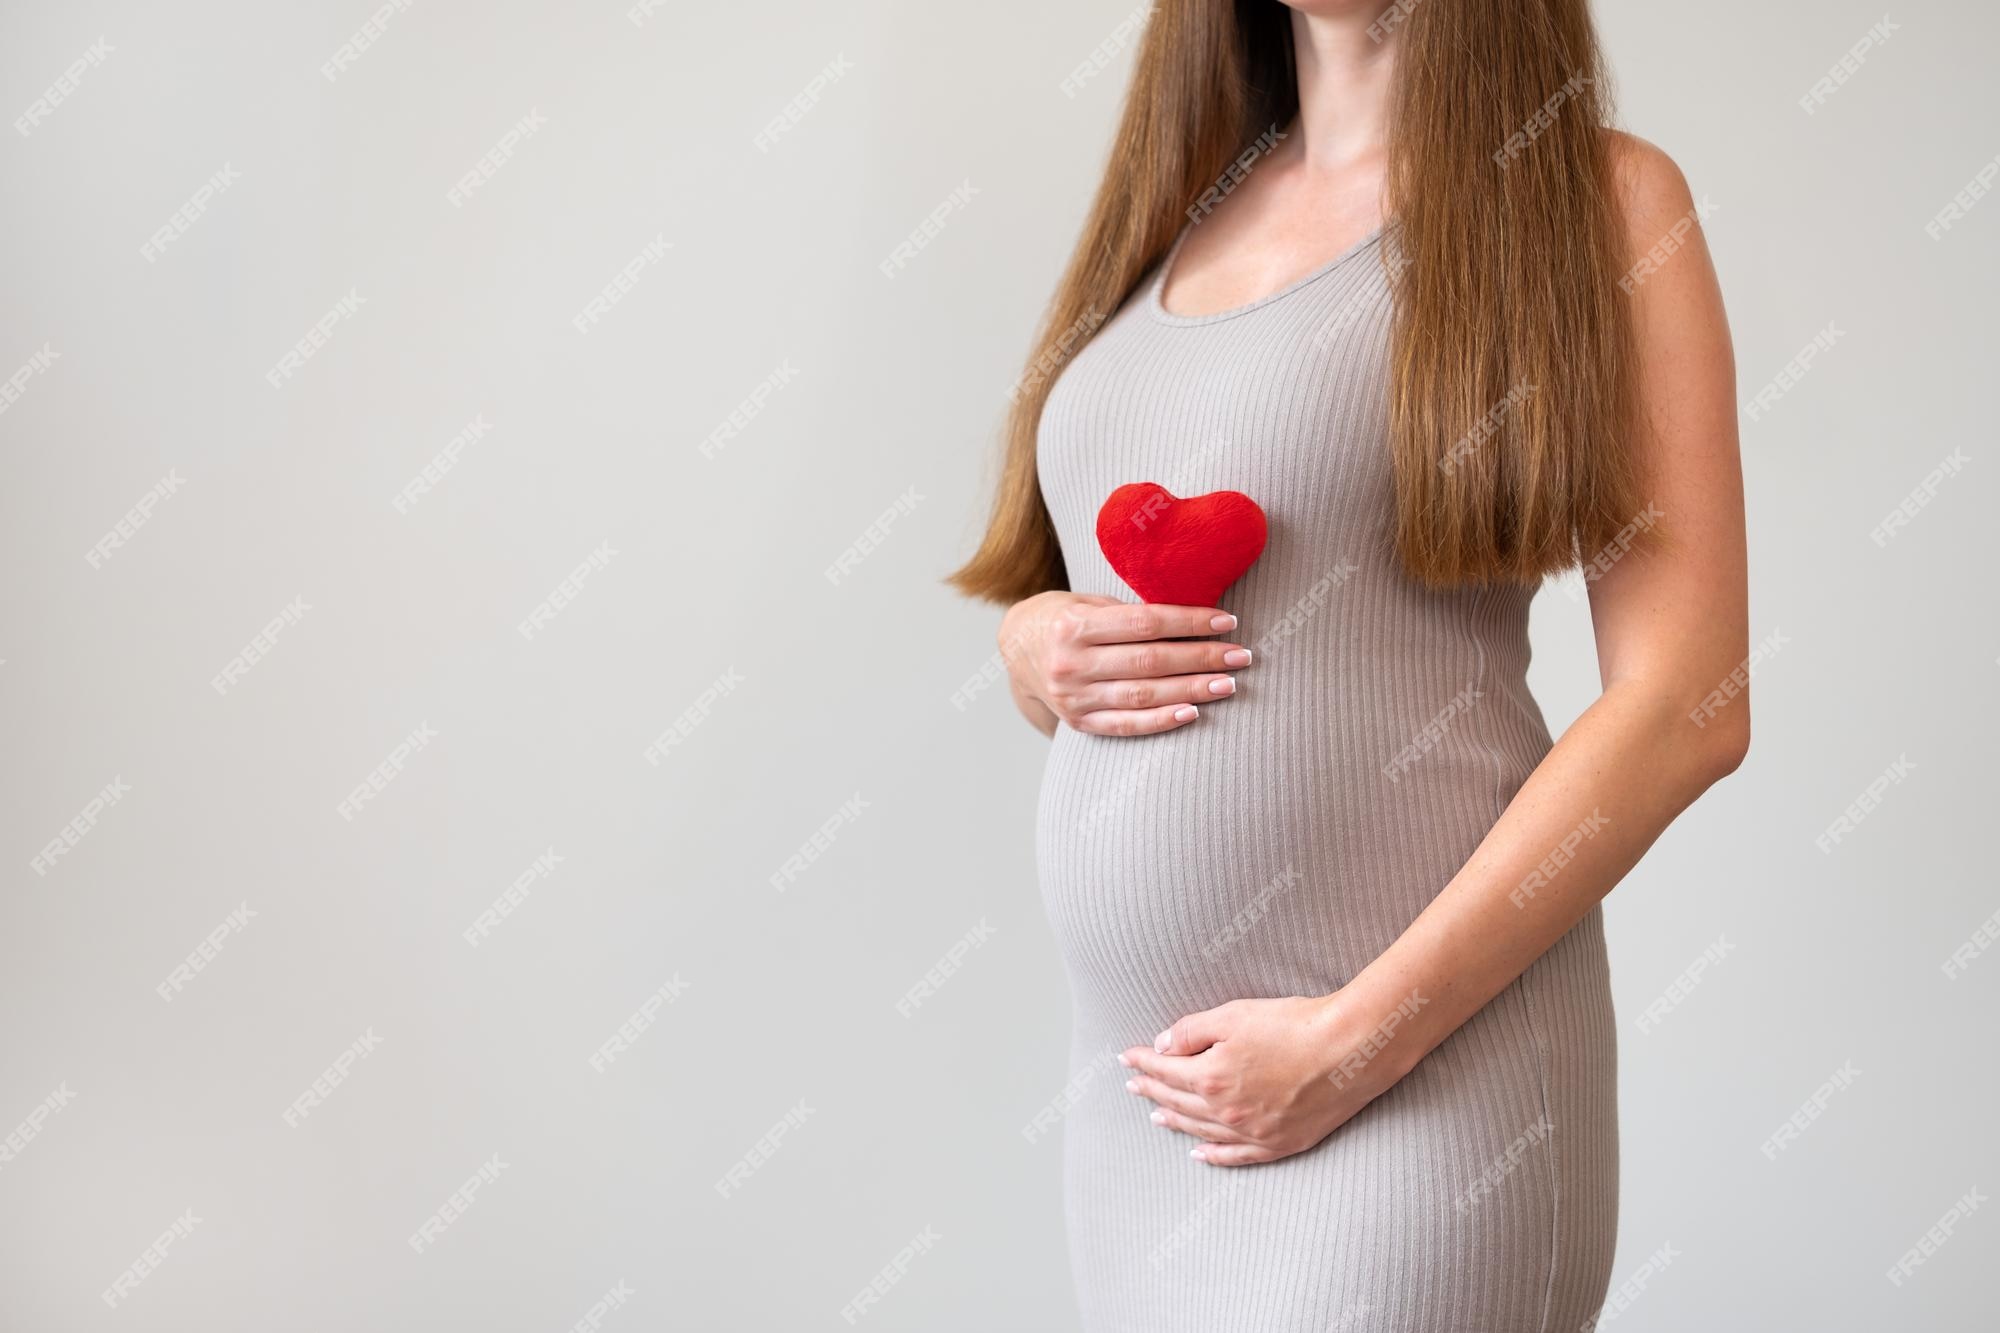 Premium Photo | Cropped shot of pregnant woman wearing tight dress holding  soft red heart on gray background pregnancy love healthcare and motherhood  concept idea of cardiology problems or deseasecopy space